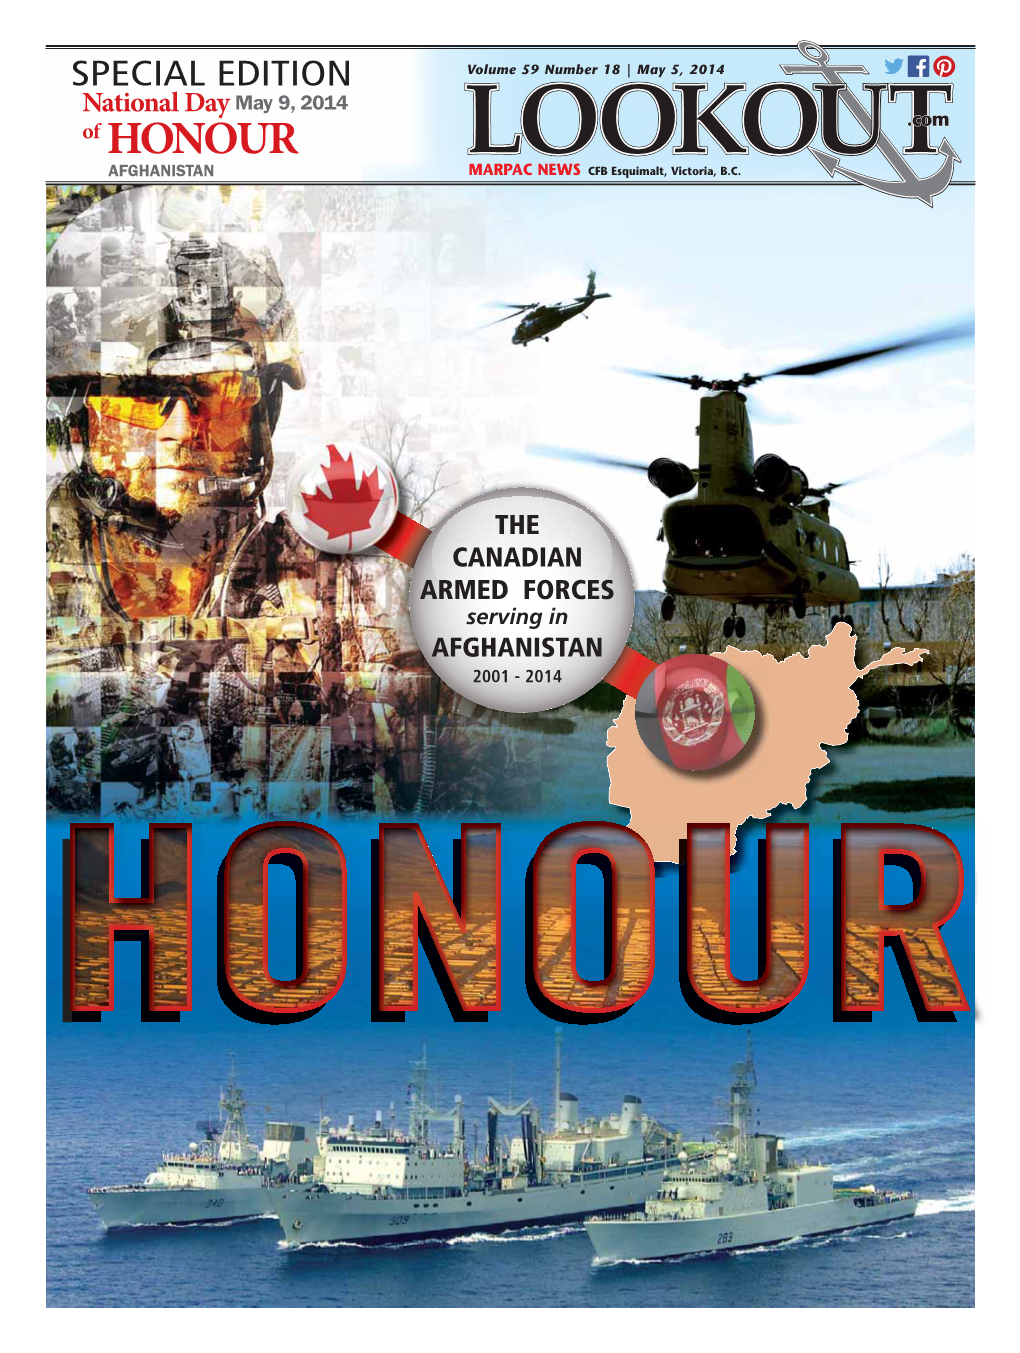 THE CANADIAN ARMED FORCES Serving in AFGHANISTAN 2001 - 2014 2 • LOOKOUT May 5, 2014 Royal Proclamation for Day of Honour